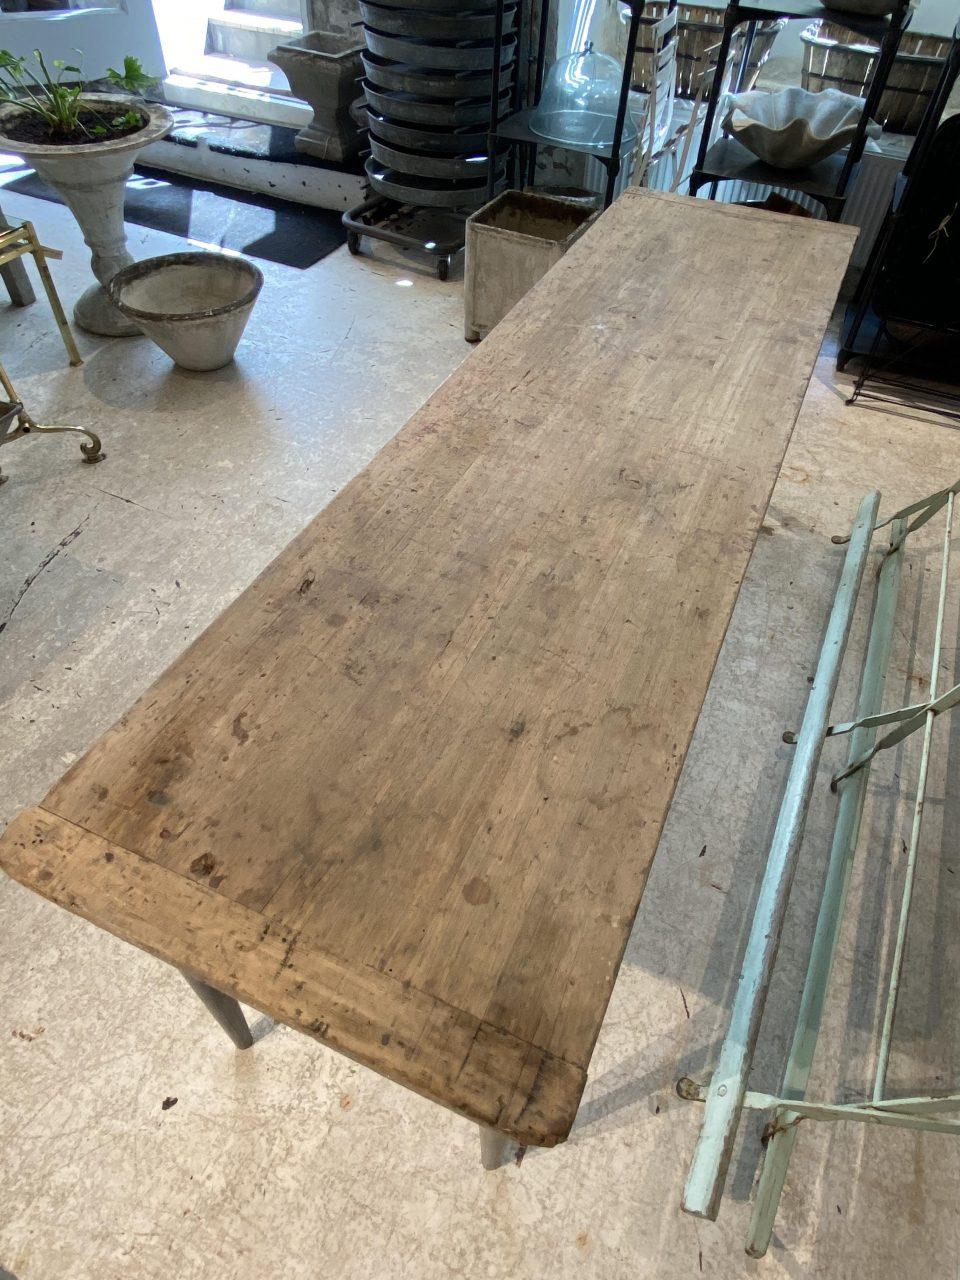 Sophisticated antique Italian console table / long table, with a luscious weathered matte pale cool blue paint and the perfect patina on worktop surface. An elegant but also rustic table that is lovely for a modern decor.

Note the beautiful